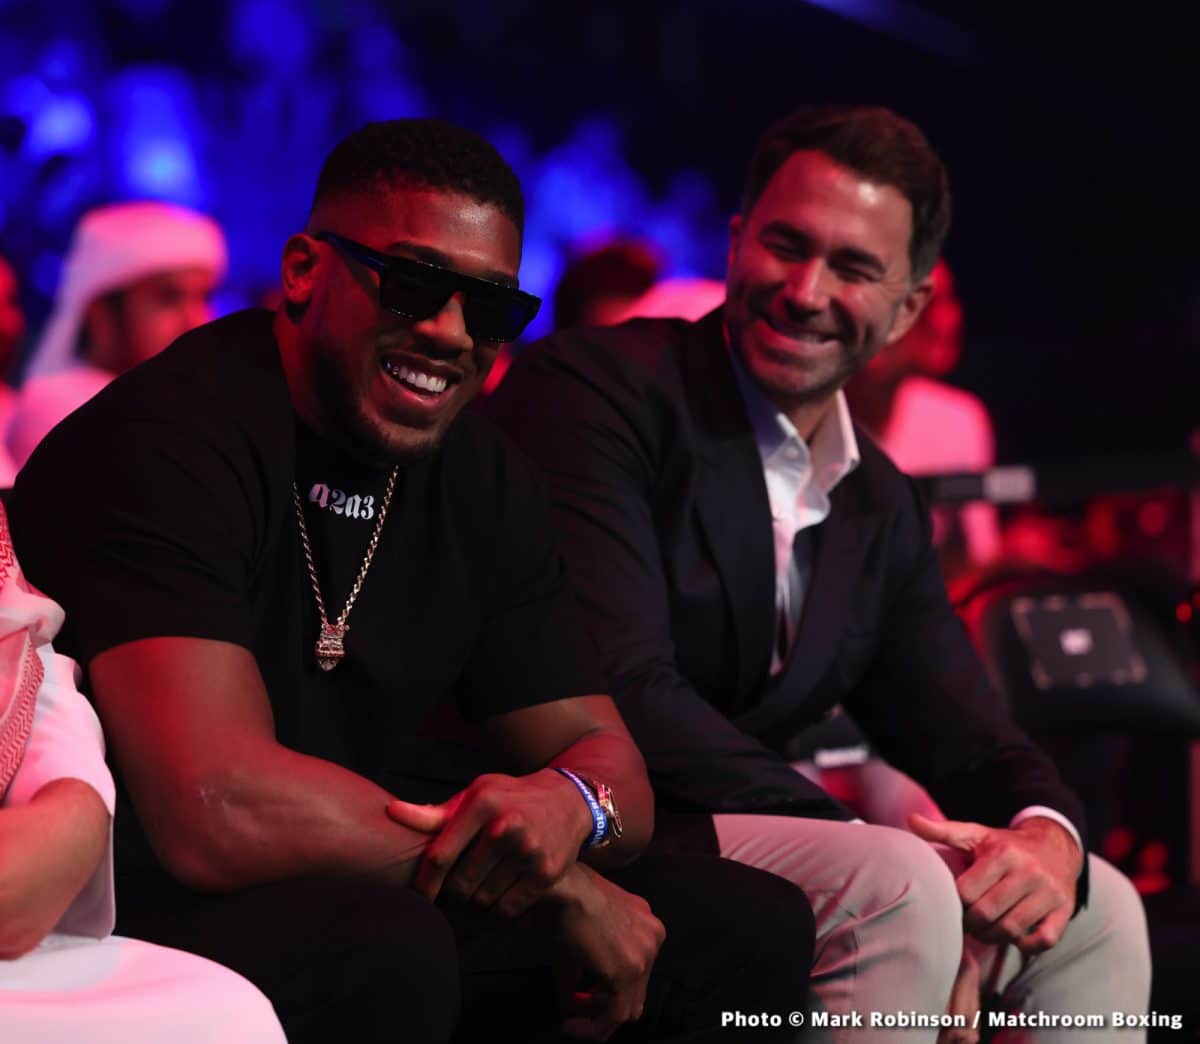 Image: Eddie Hearn: "Anthony Joshua not interested in s**t fights, Dillian Whyte front runner"